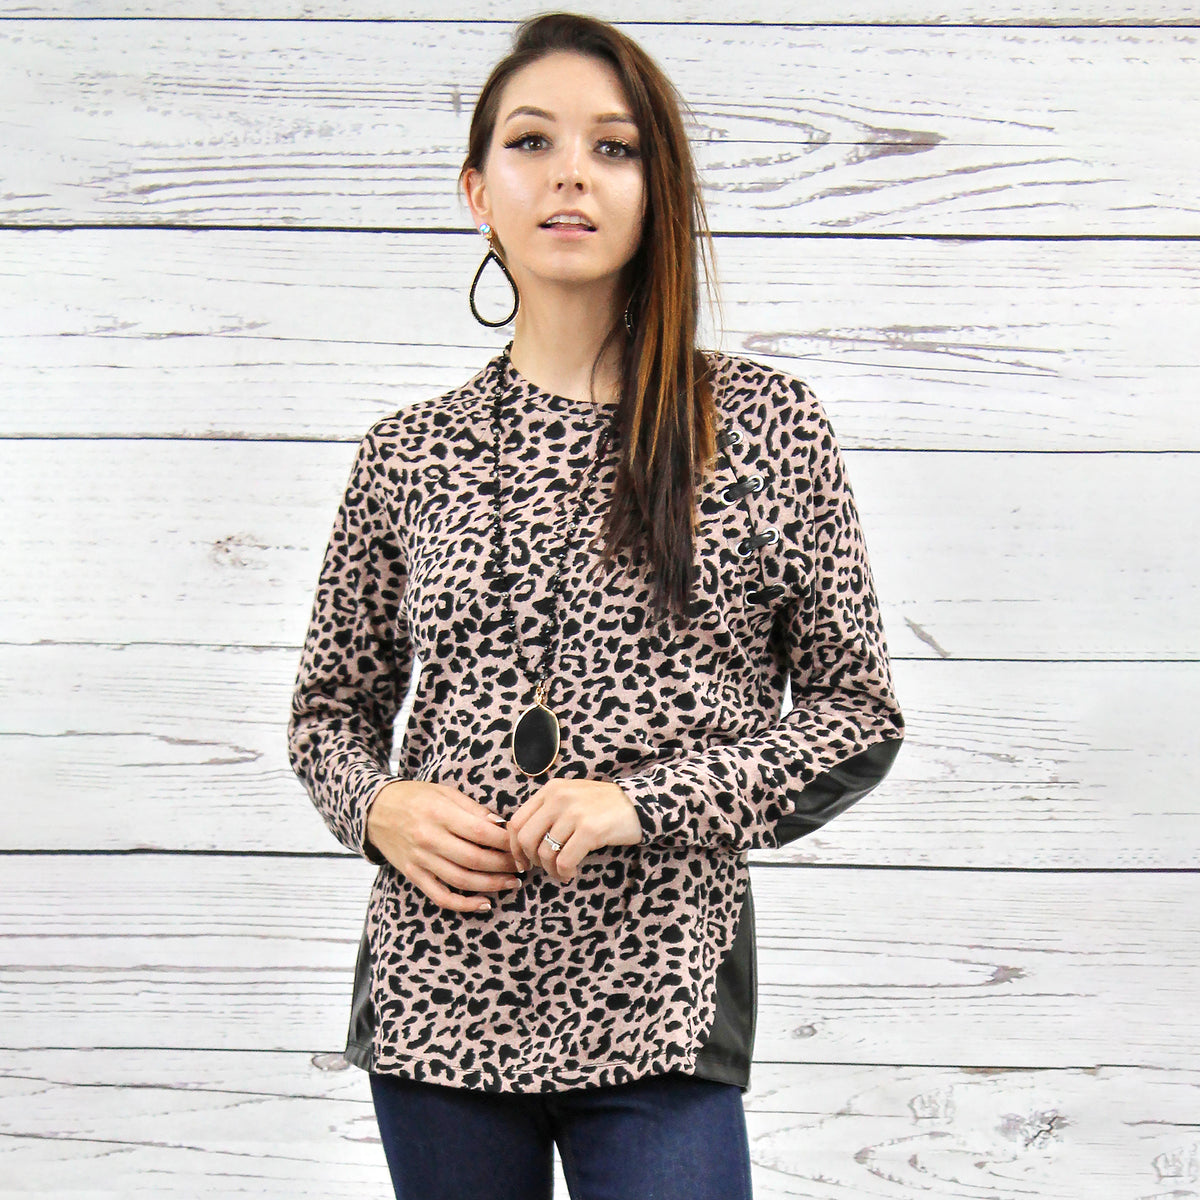 10426 - Leopard Top with Elbow Patches - Pink